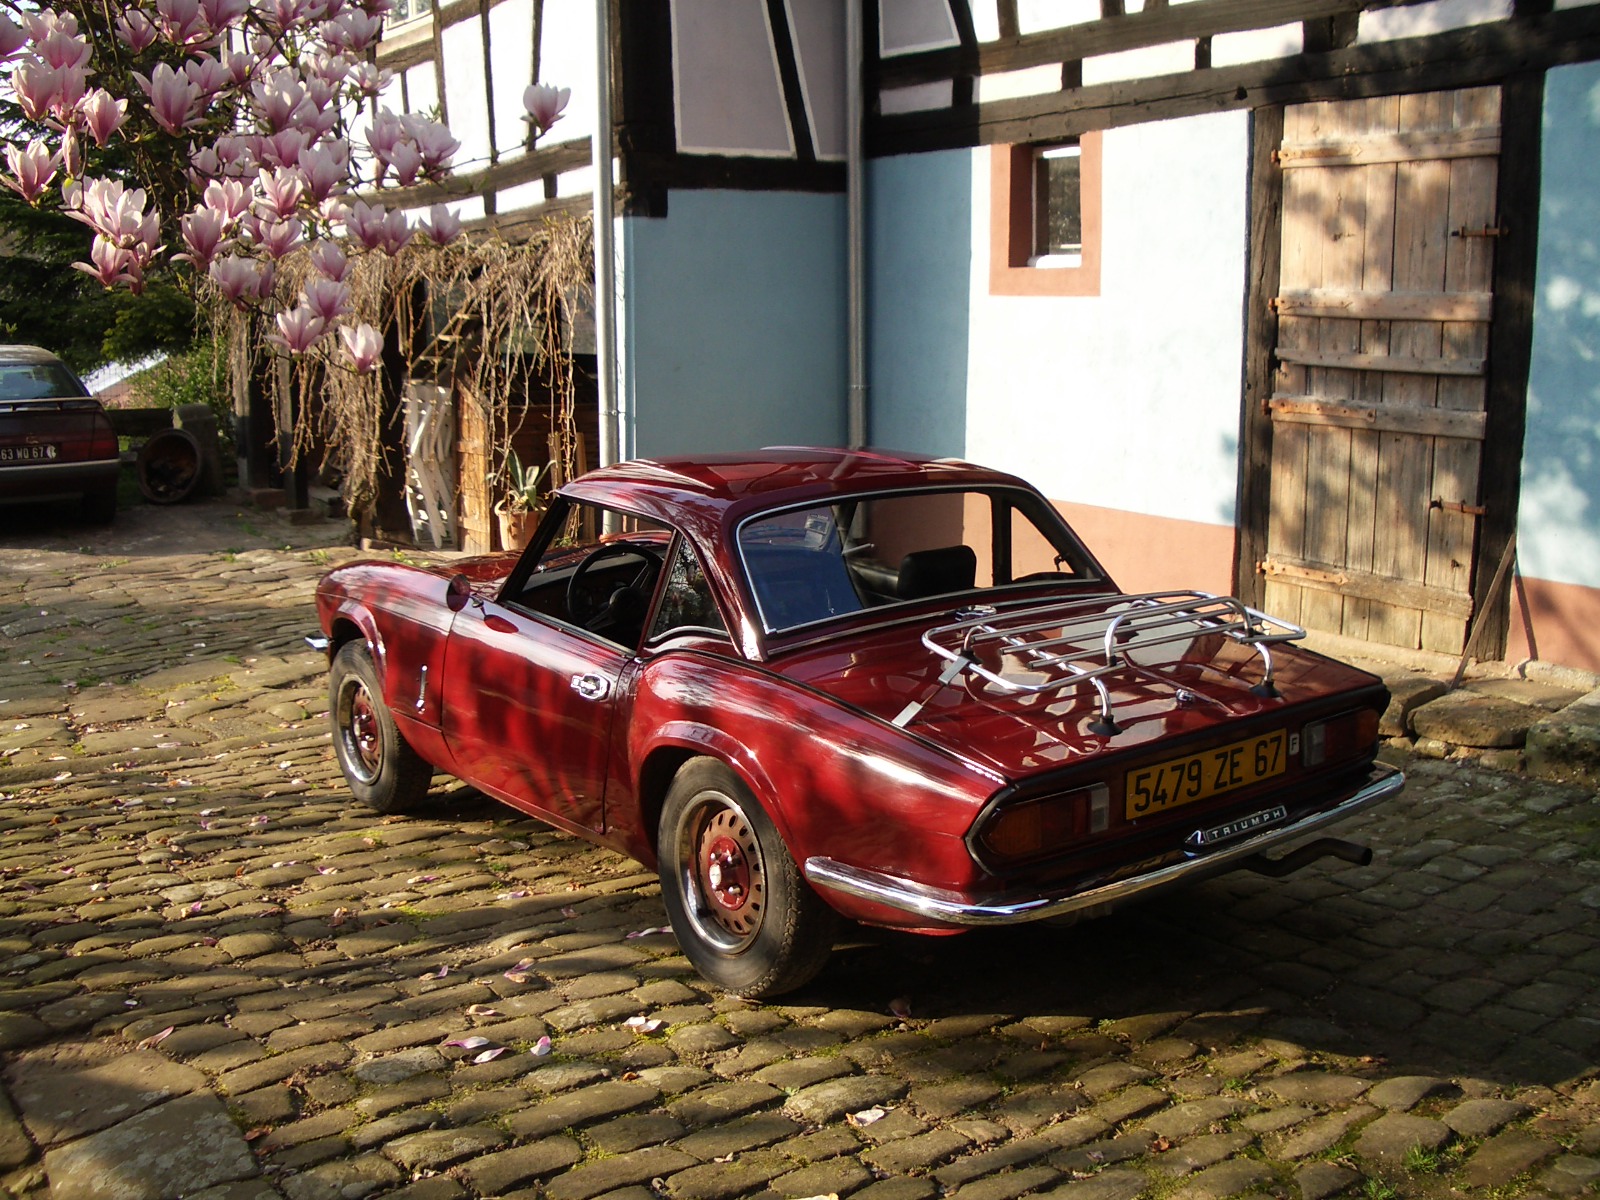 File:Triumph Spitfire 1500 with hardtop and luggage rack - rear.jpeg -  Wikimedia Commons